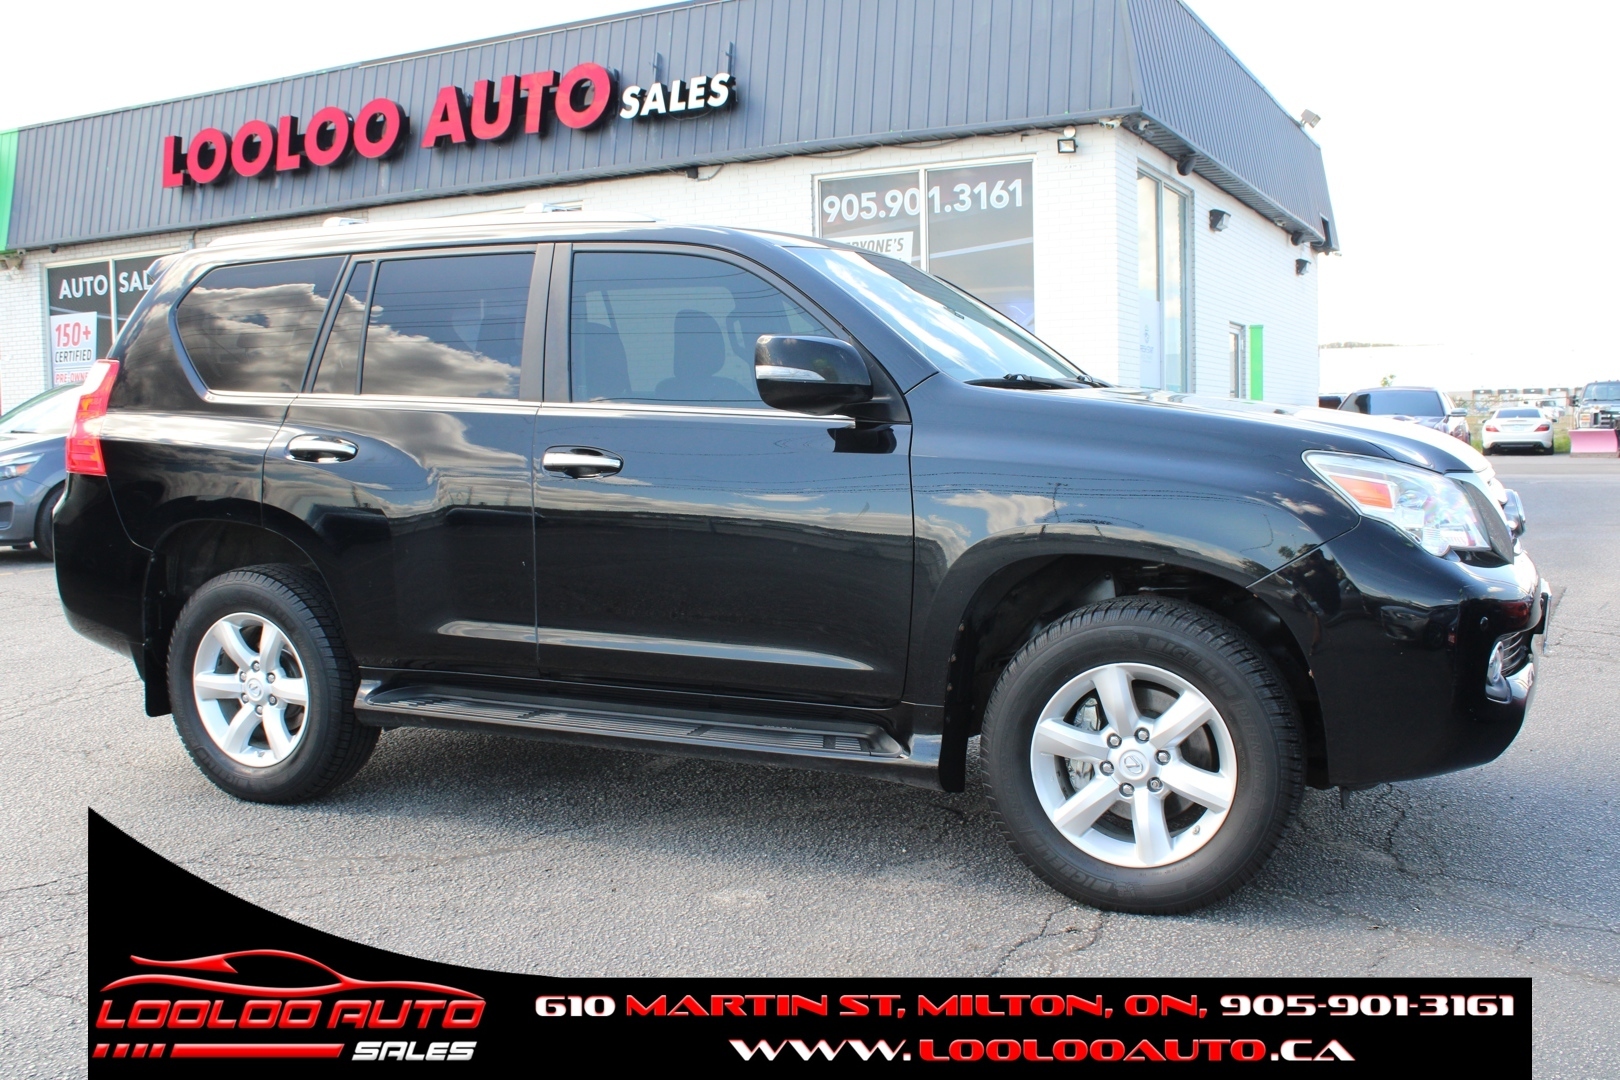 2011 Lexus GX 460 SUV | 4WD | NO ACCIDENT | SAFETY CERTIFIED | 7 PAS